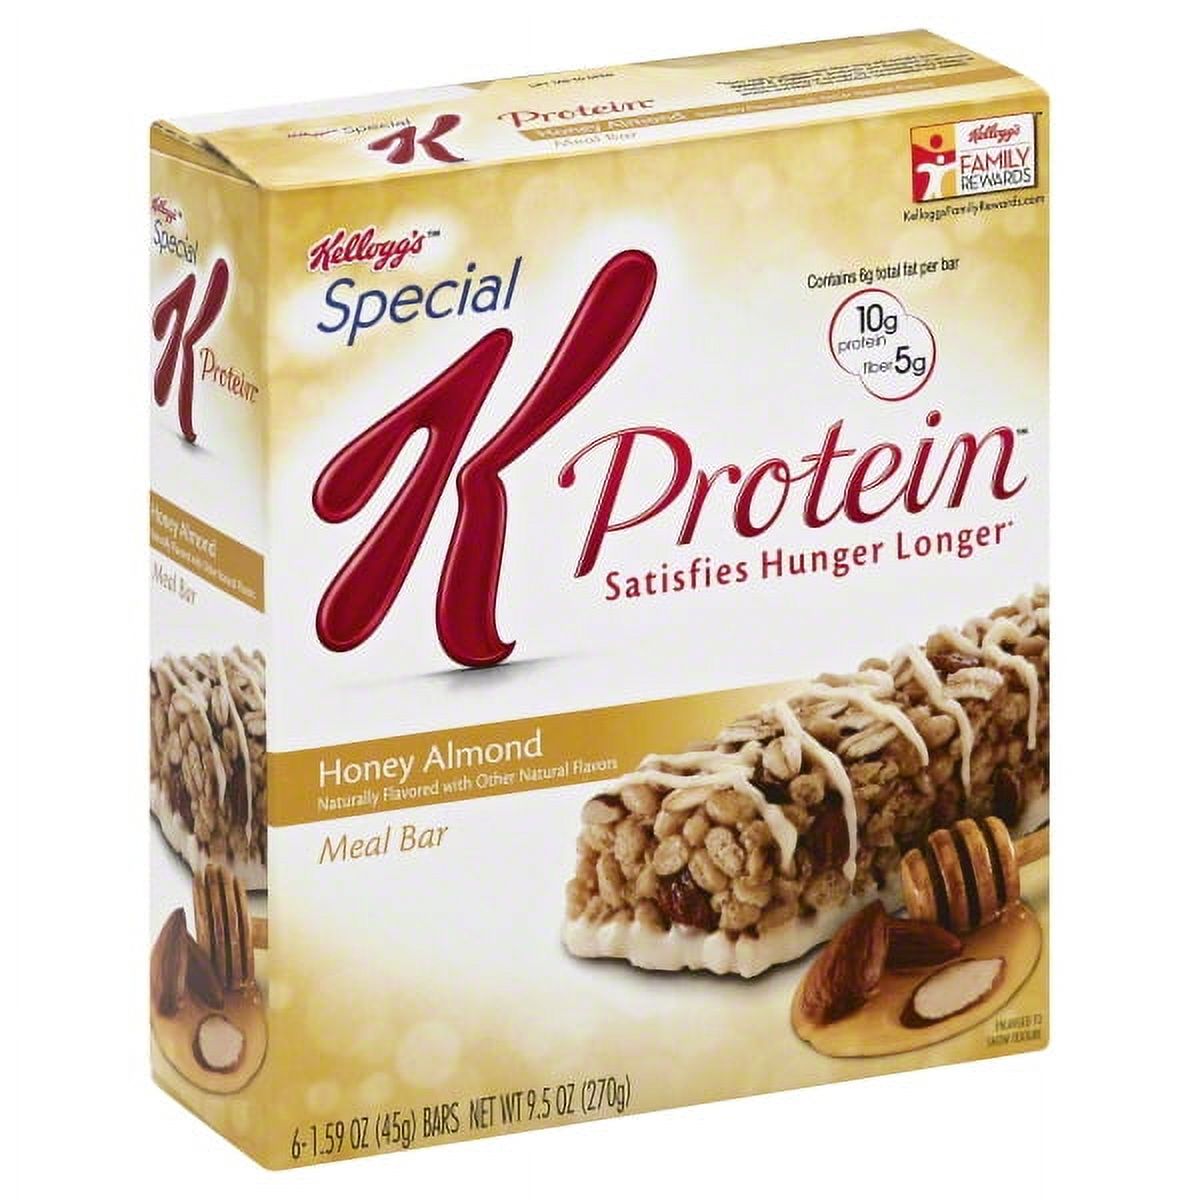 Special K Honey Almond Meal Bar - image 1 of 8